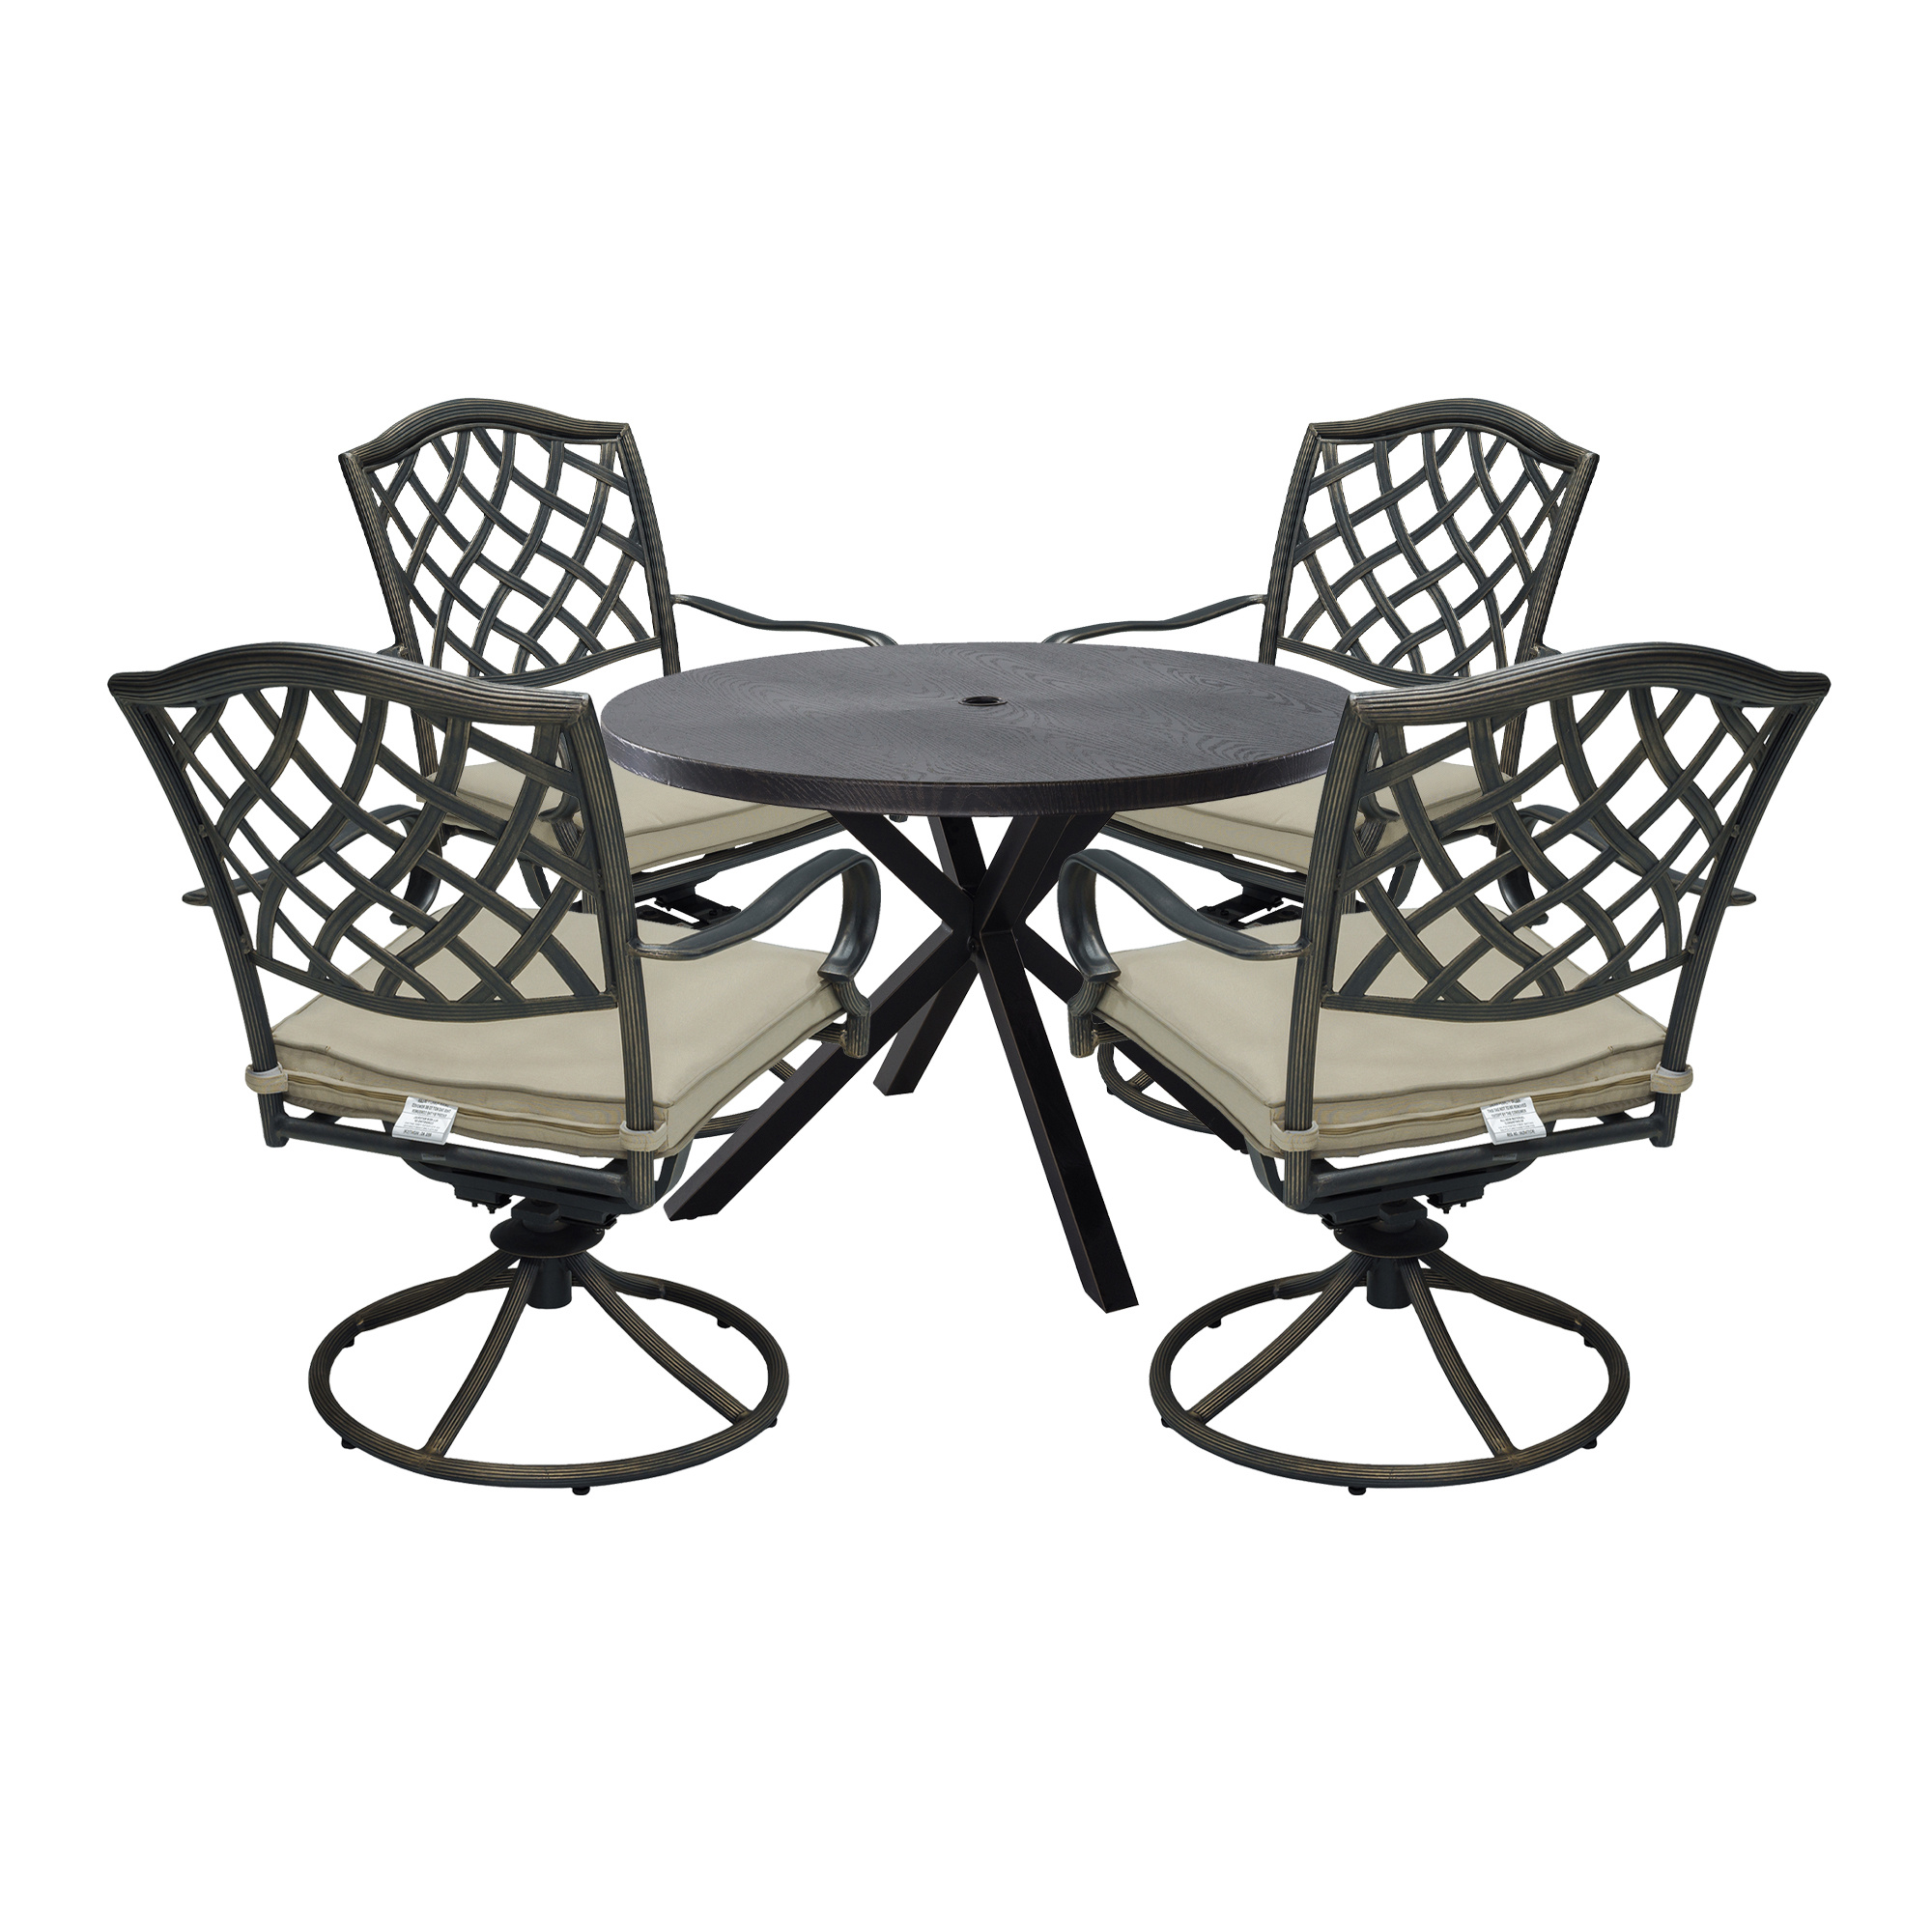 Cast Aluminum 5-Piece Outdoor Patio Dining Set with Table and Swivel Chairs